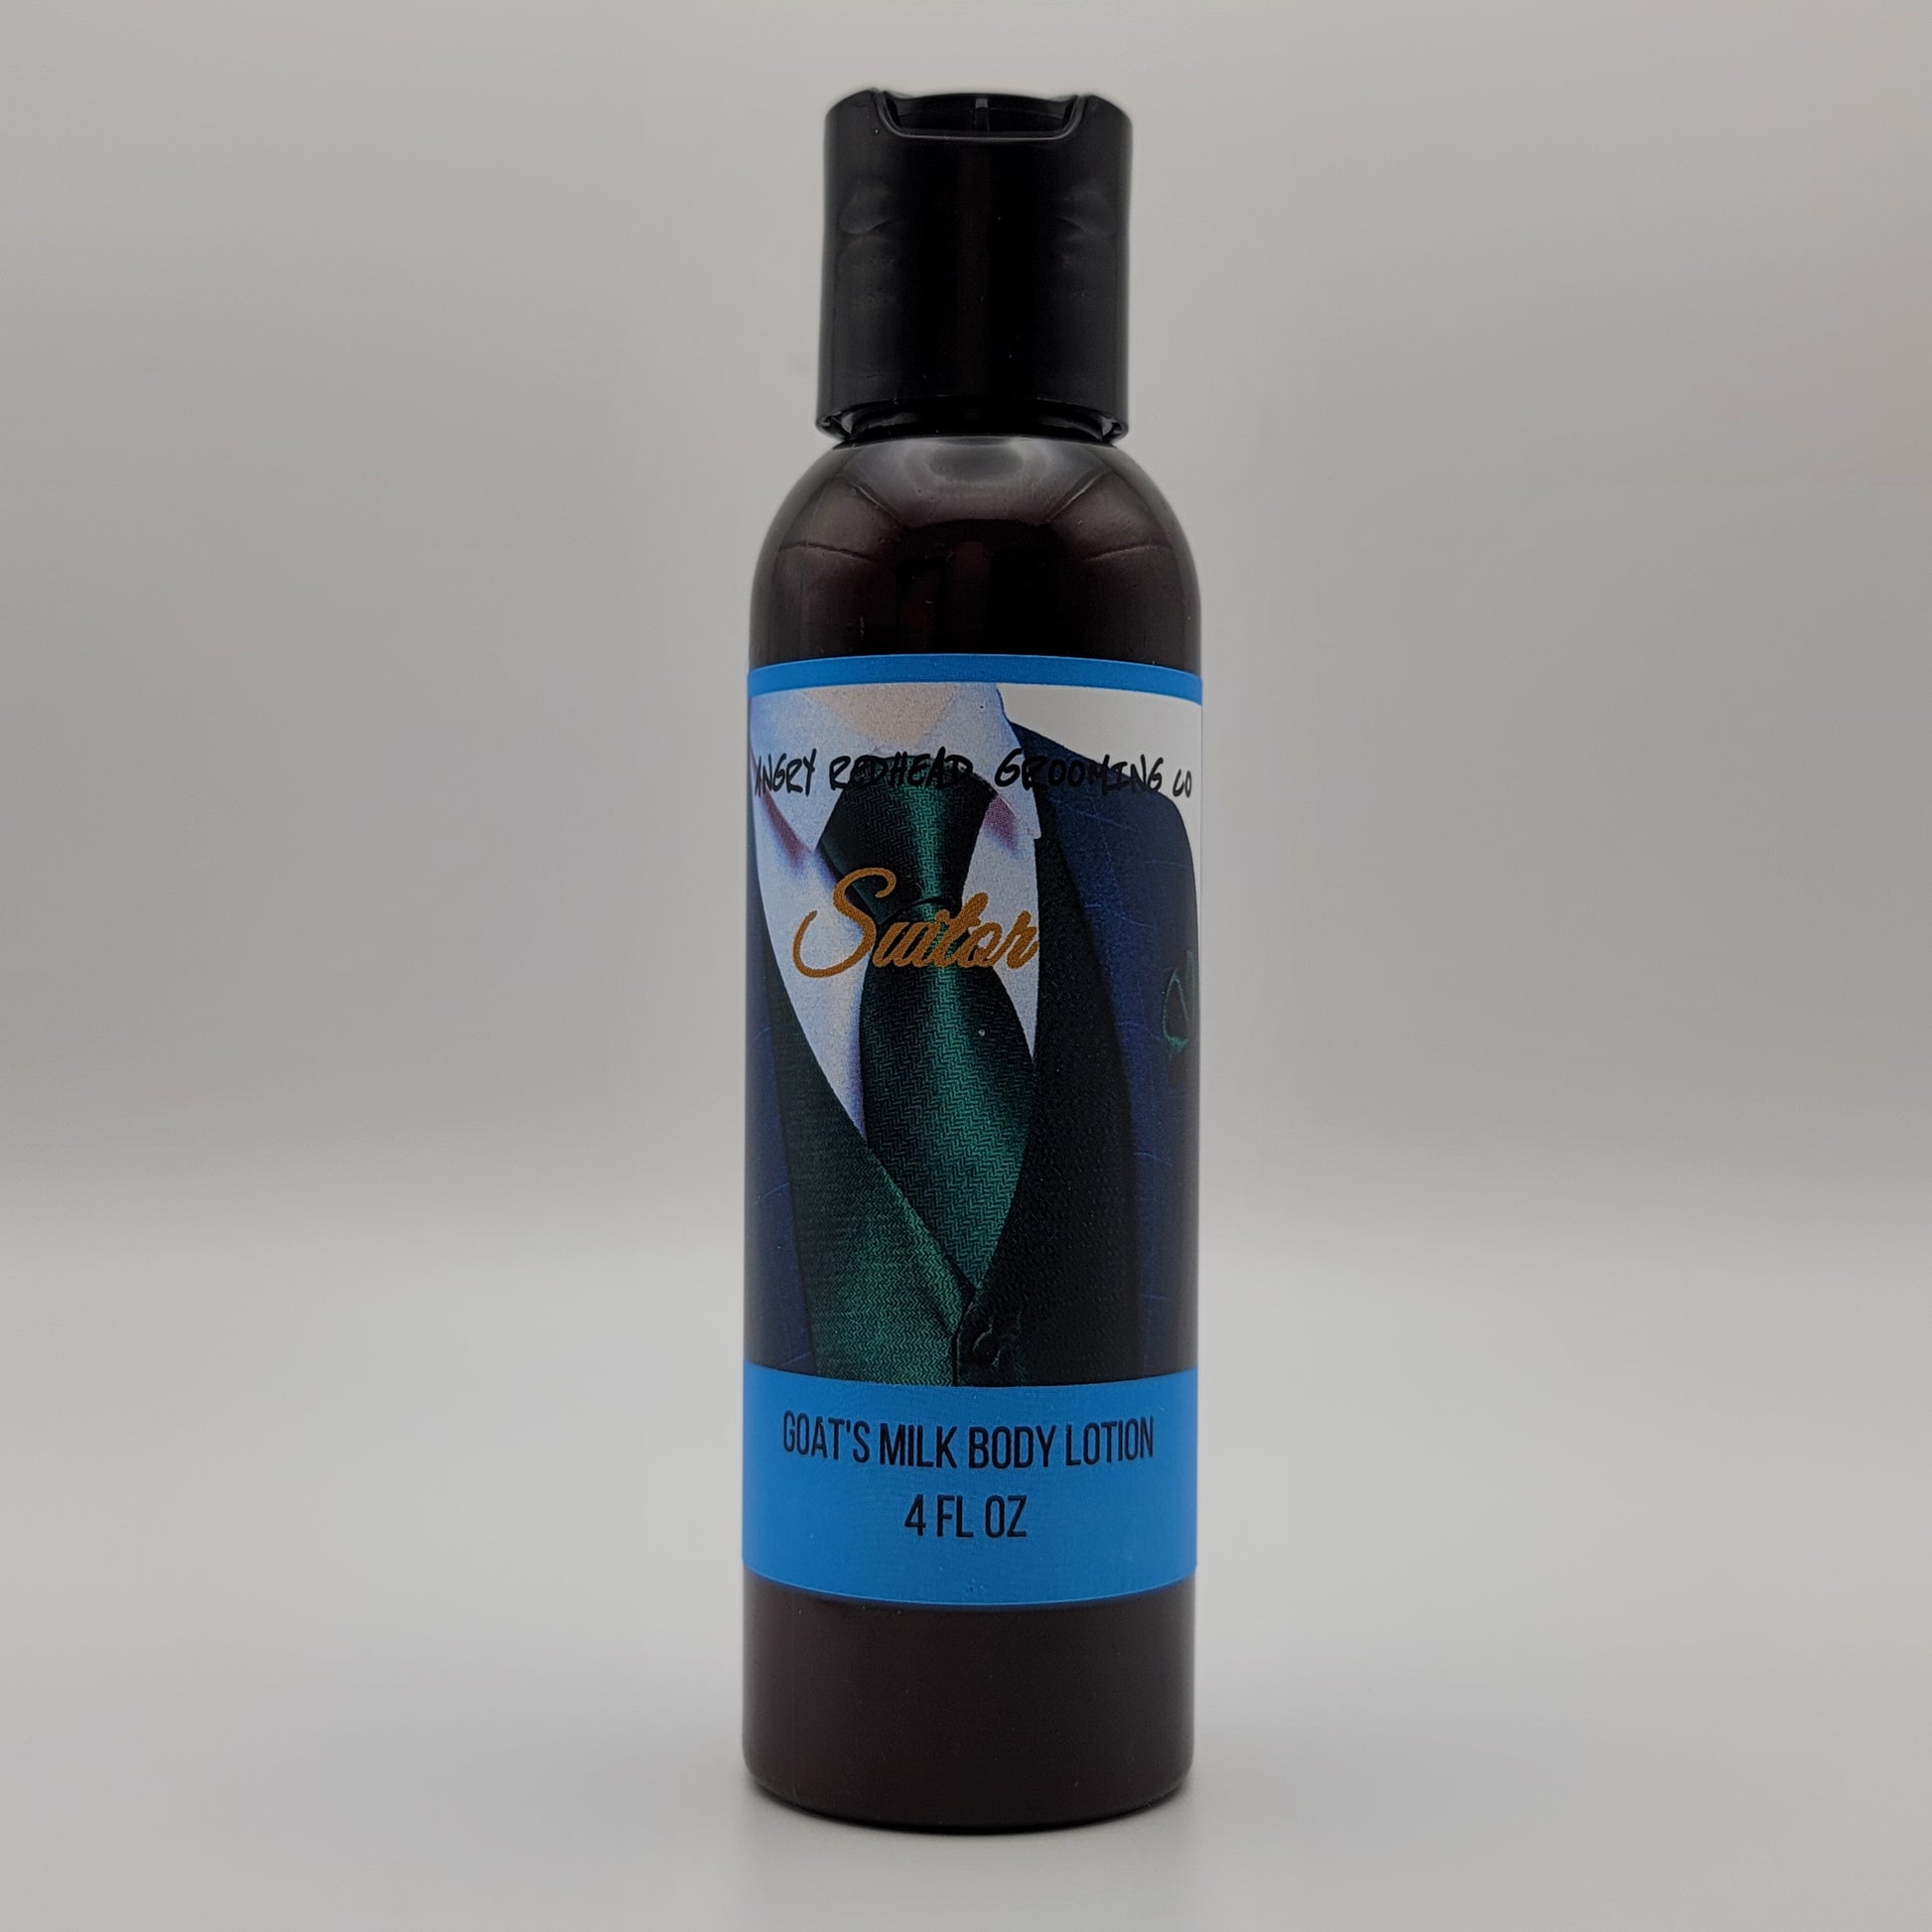 Suitor Goat's Milk Body Lotion by Angry Redhead Grooming Co - angryredheadgrooming.com